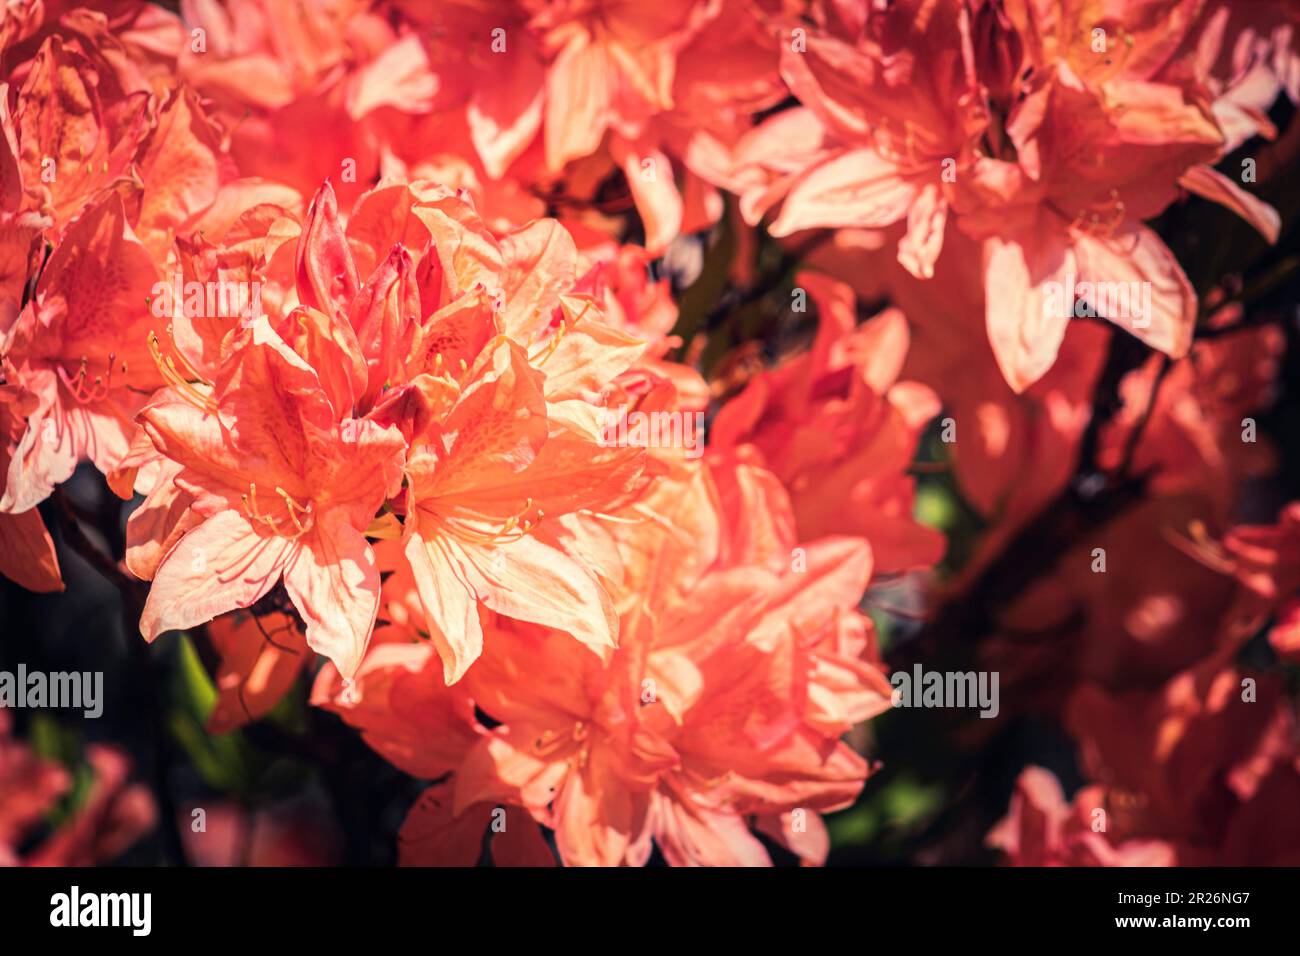 Full frame tight crop background image of Rhododendron flowers in bloom in spring. Stock Photo